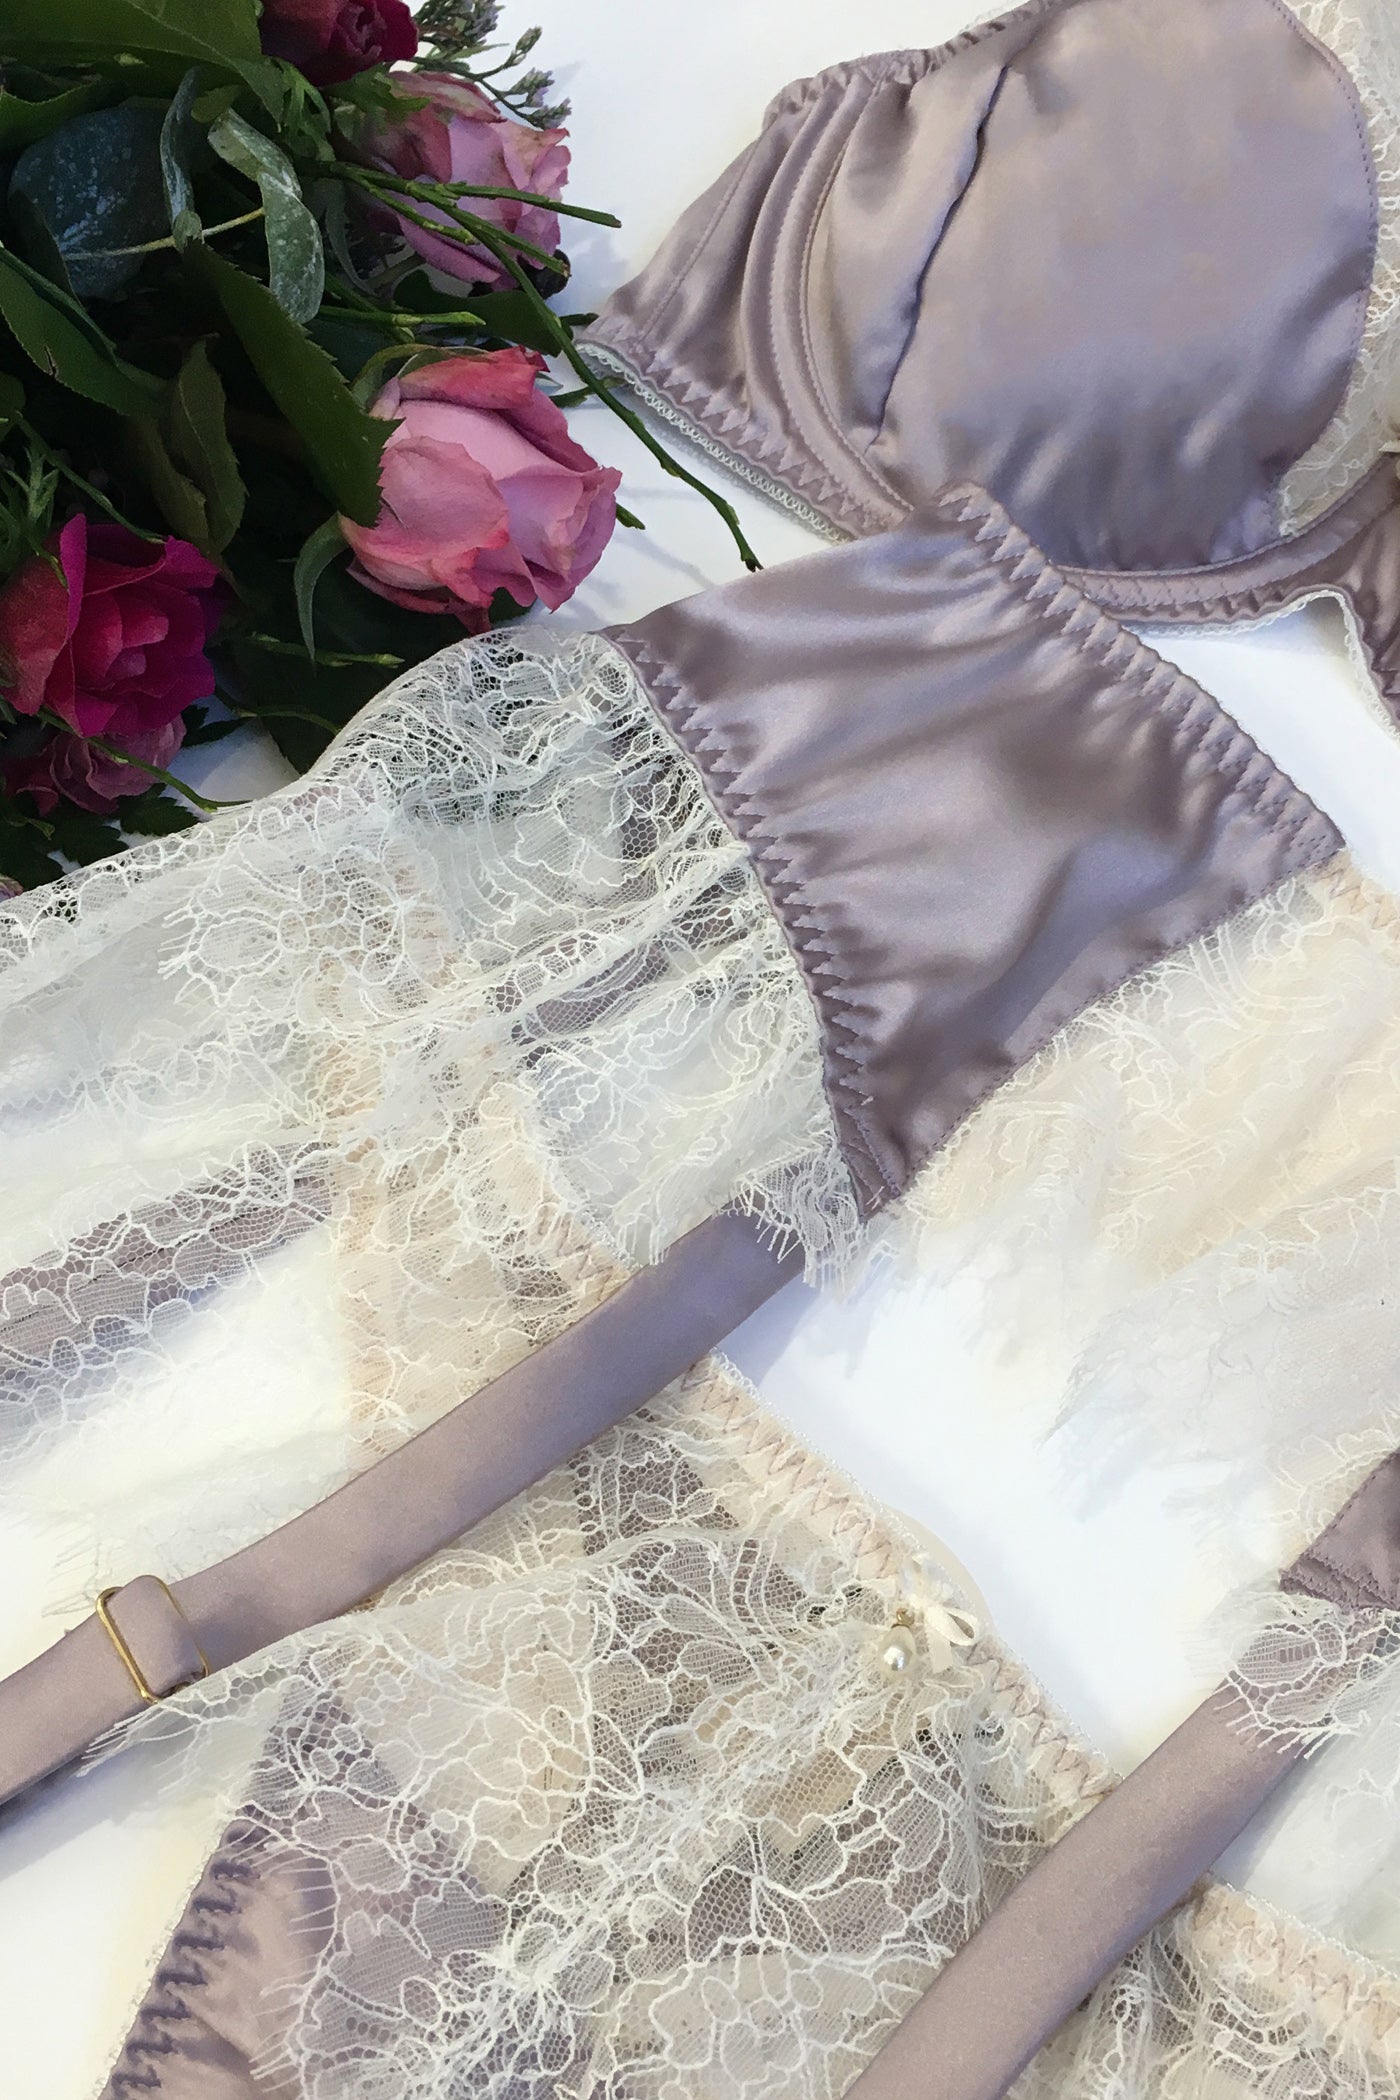 Vintage style lingerie set flatlay with garter belt, bra and thong in lilac silk and white lace